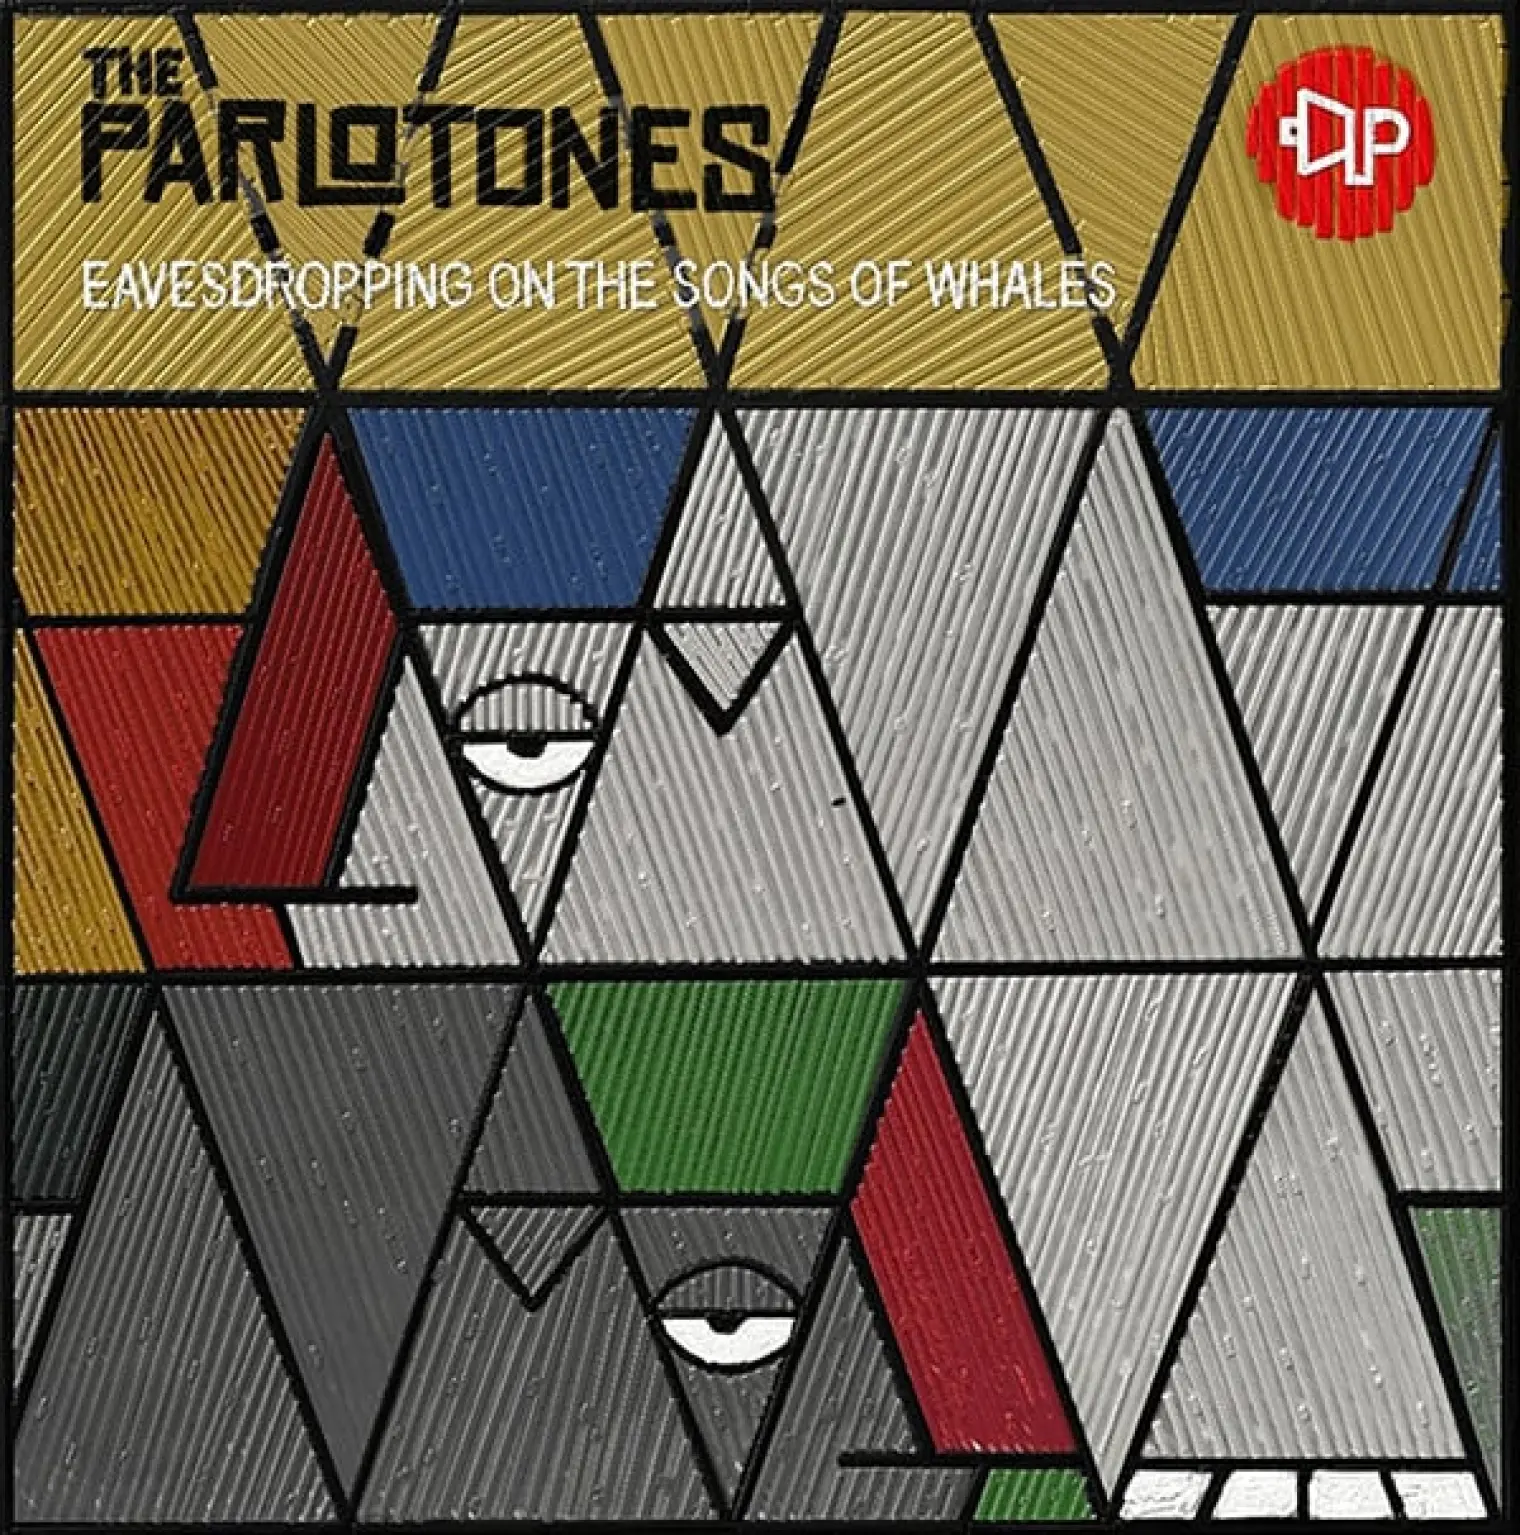 Eavesdropping on the Songs of Whales -  The Parlotones 